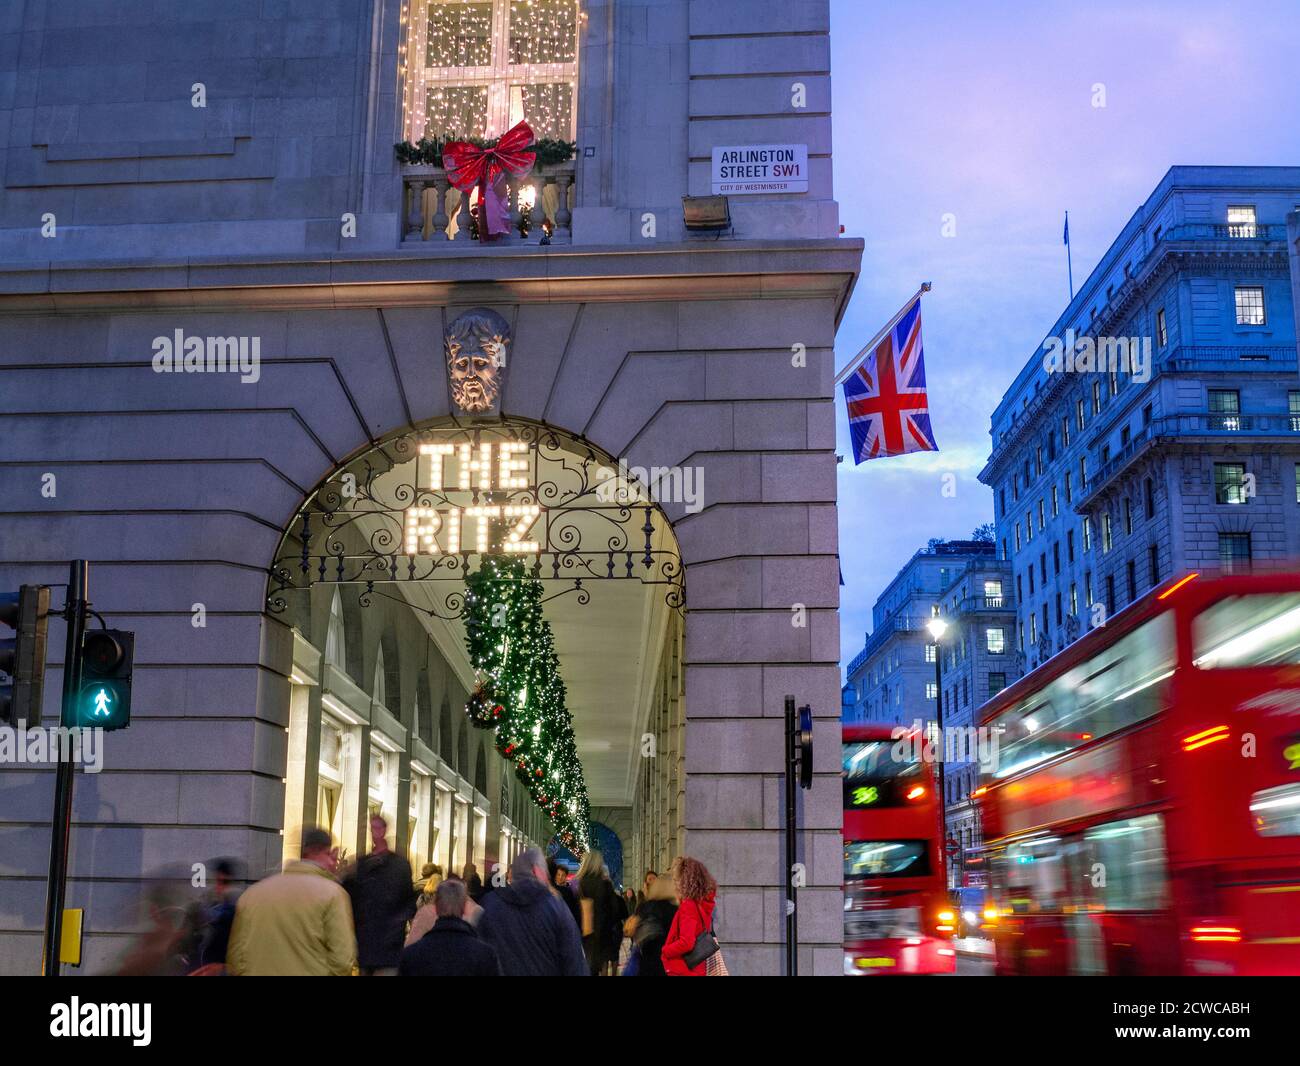 The Ritz Hotel at Christmas festive season, evening night lights ‘The Ritz’ sign illuminated, with a Union Jack flag, shoppers and passing London red buses Arlington Street Piccadilly London UK Stock Photo